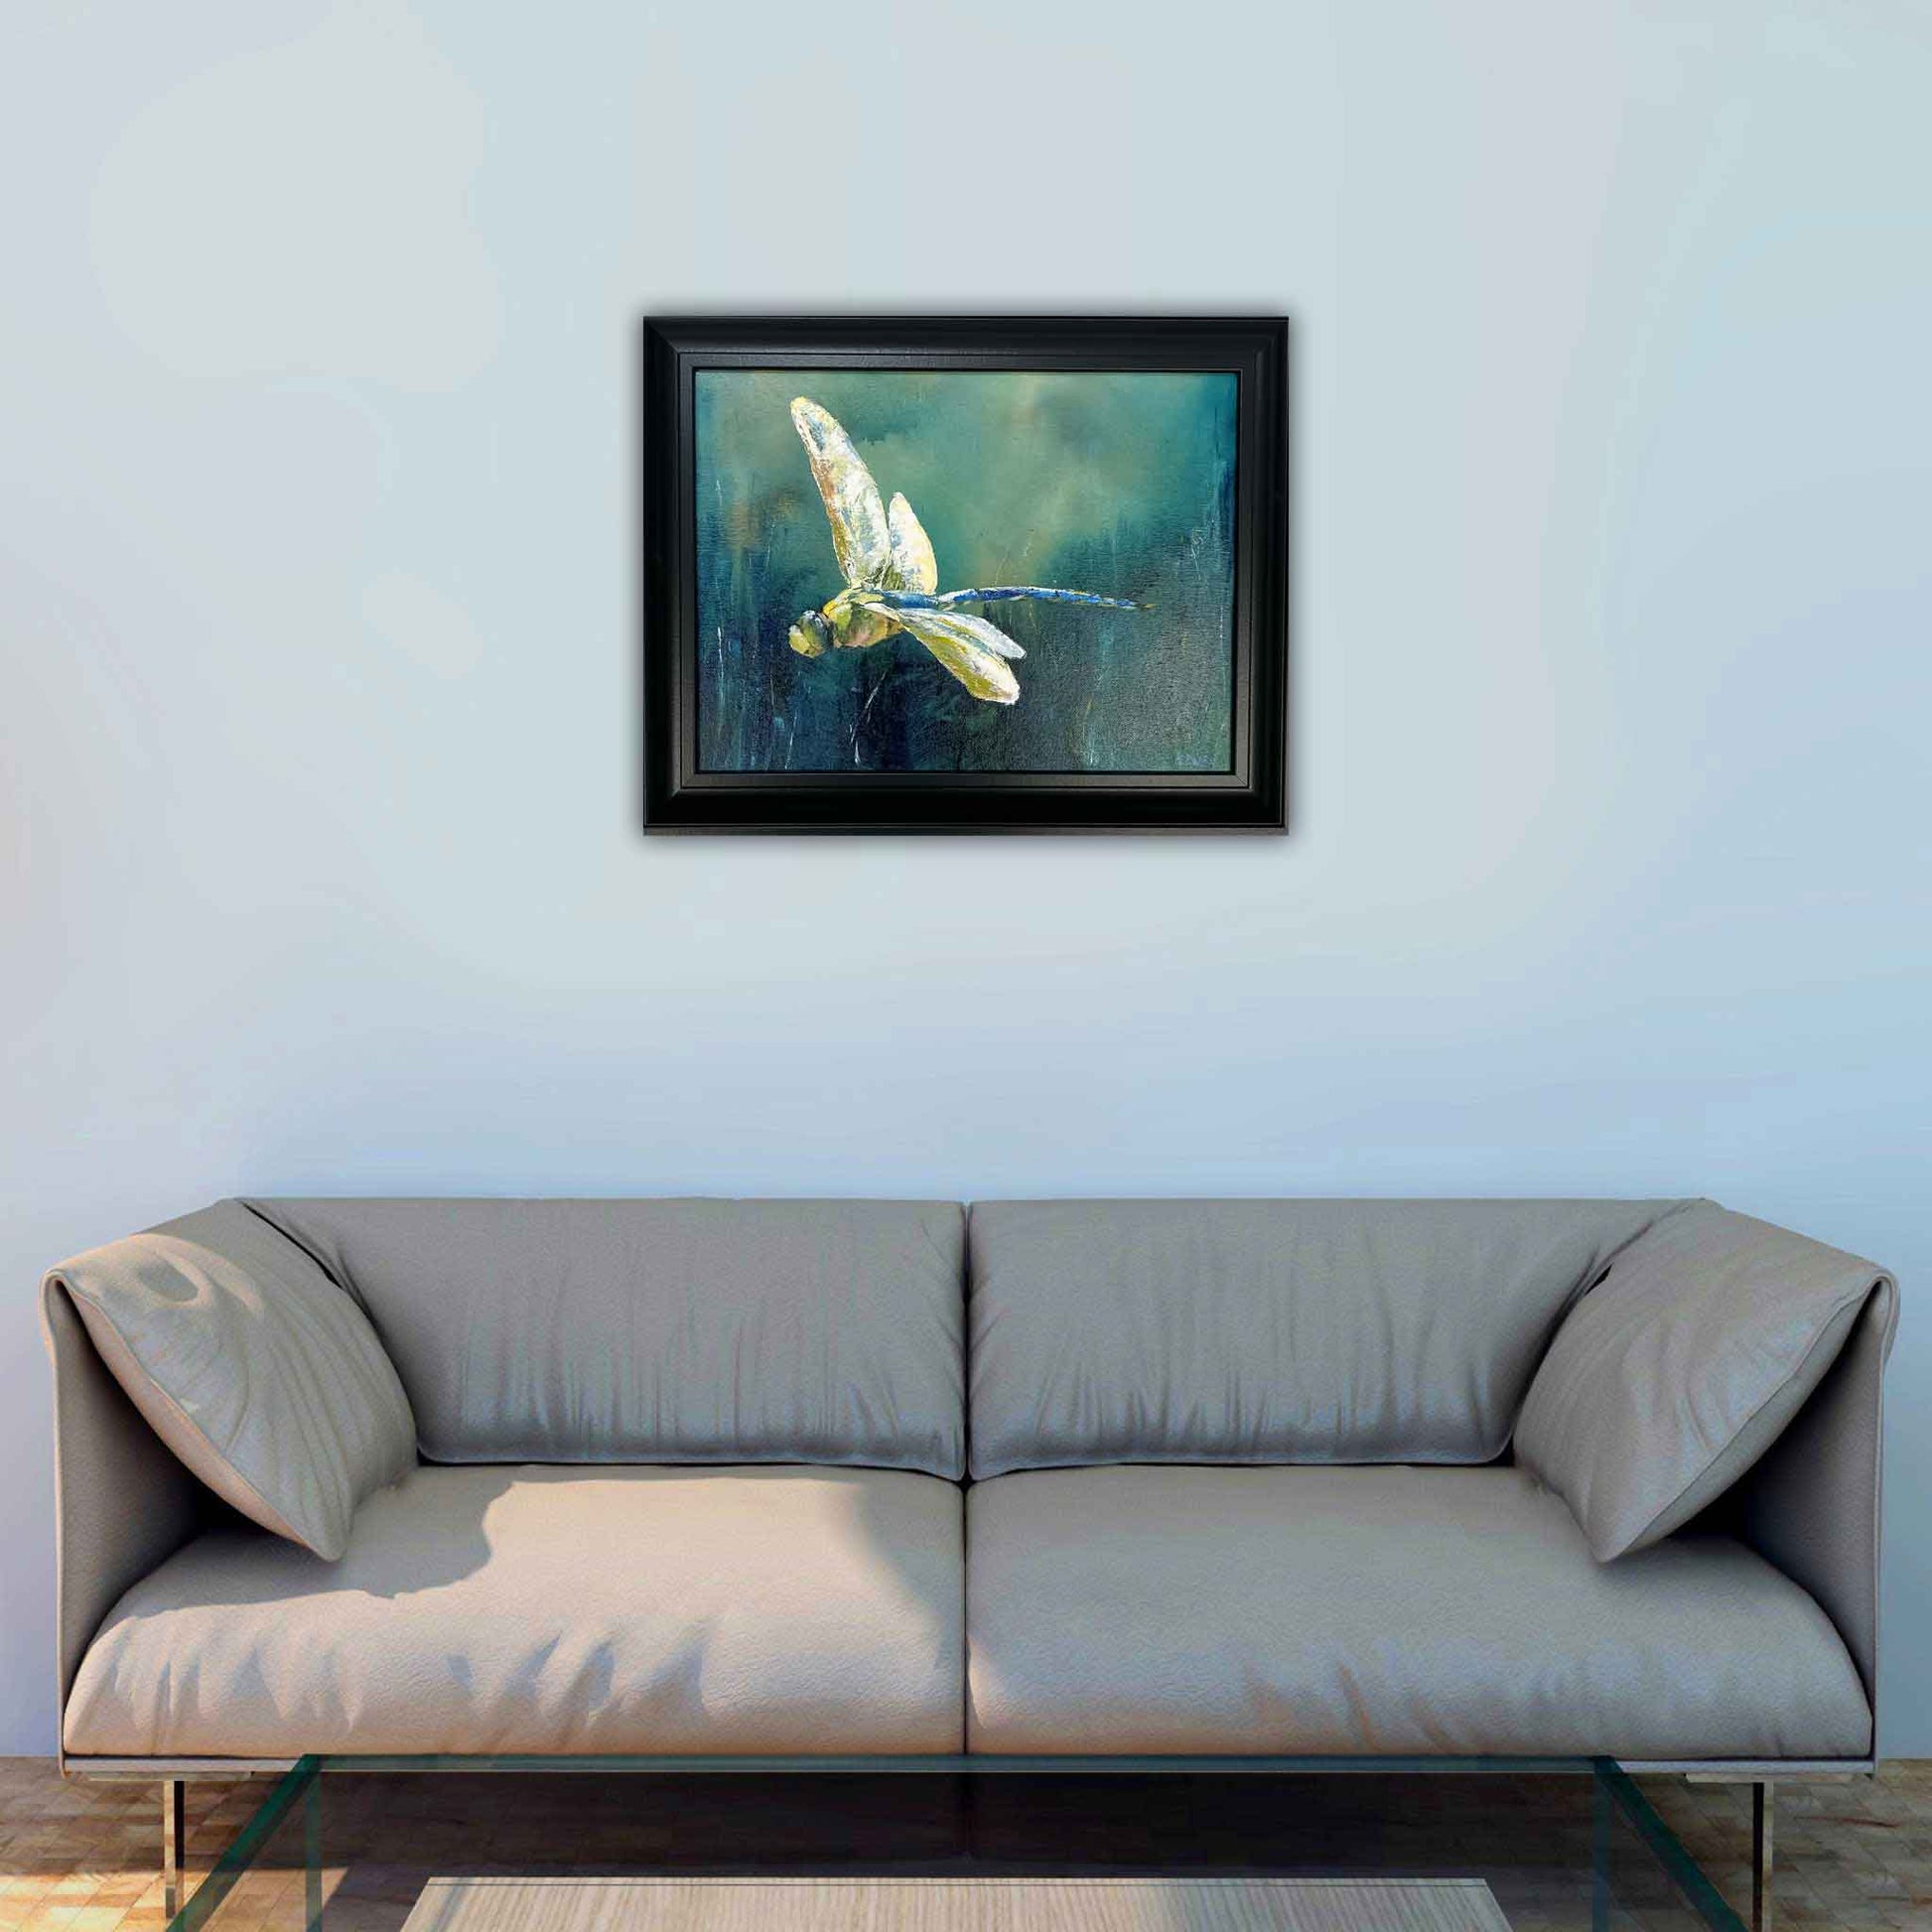 JRO In Flight - Dragonfly Swooping Down Painting by Artist Becky Owen. An original acrylic painting. Brilliant yellow dragonfly set against a blue and green background. Framed in a black wooden frame. 14" x 17".